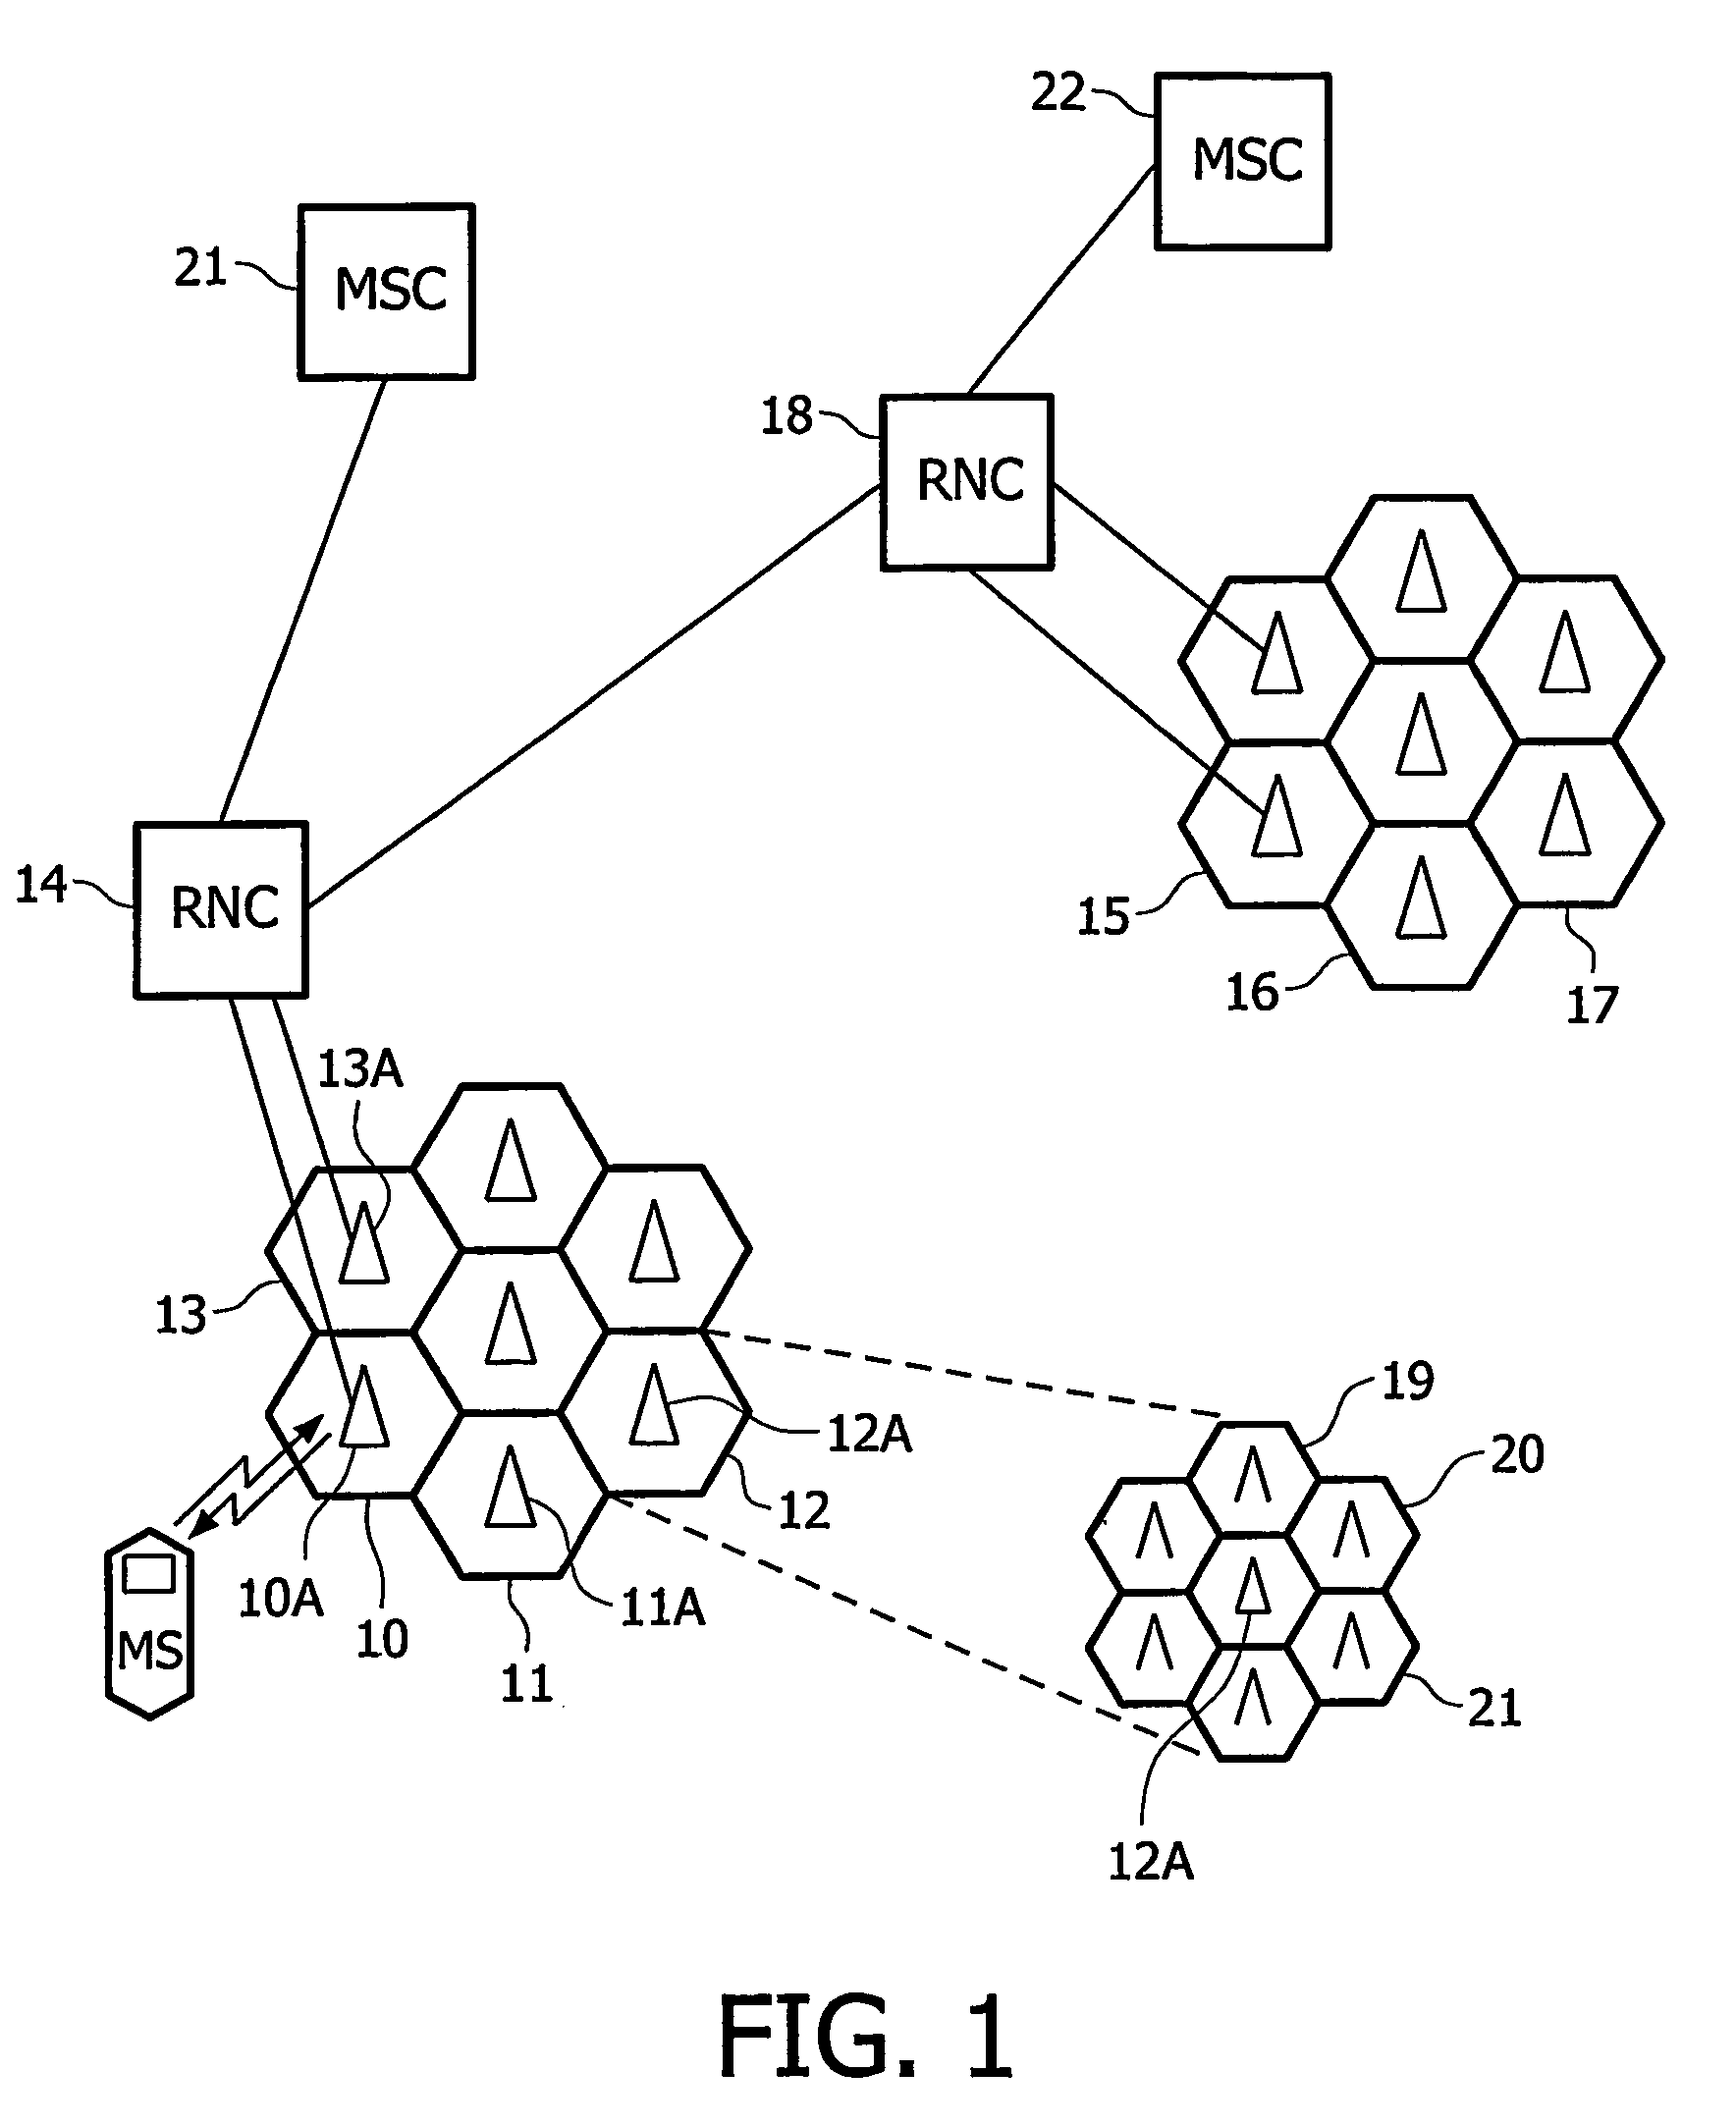 Controlling reconfiguration in a cellular communication system